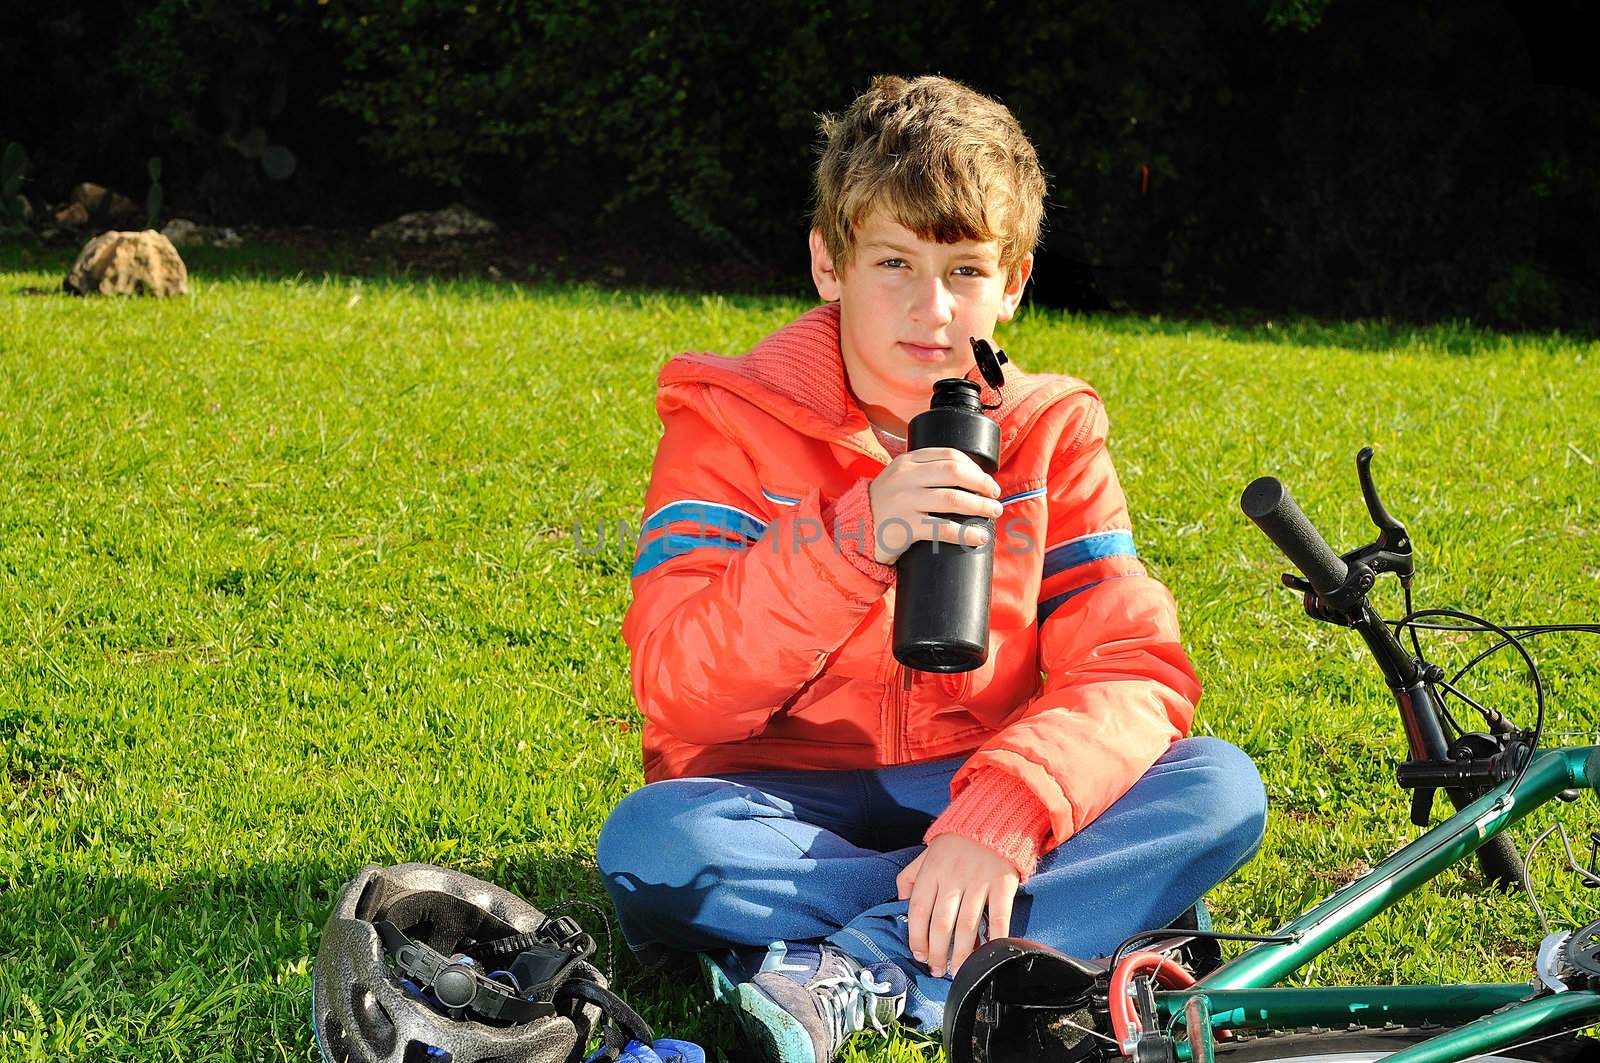 
The boy sitting on the grass in a park near the bike and drinking water from a bottle